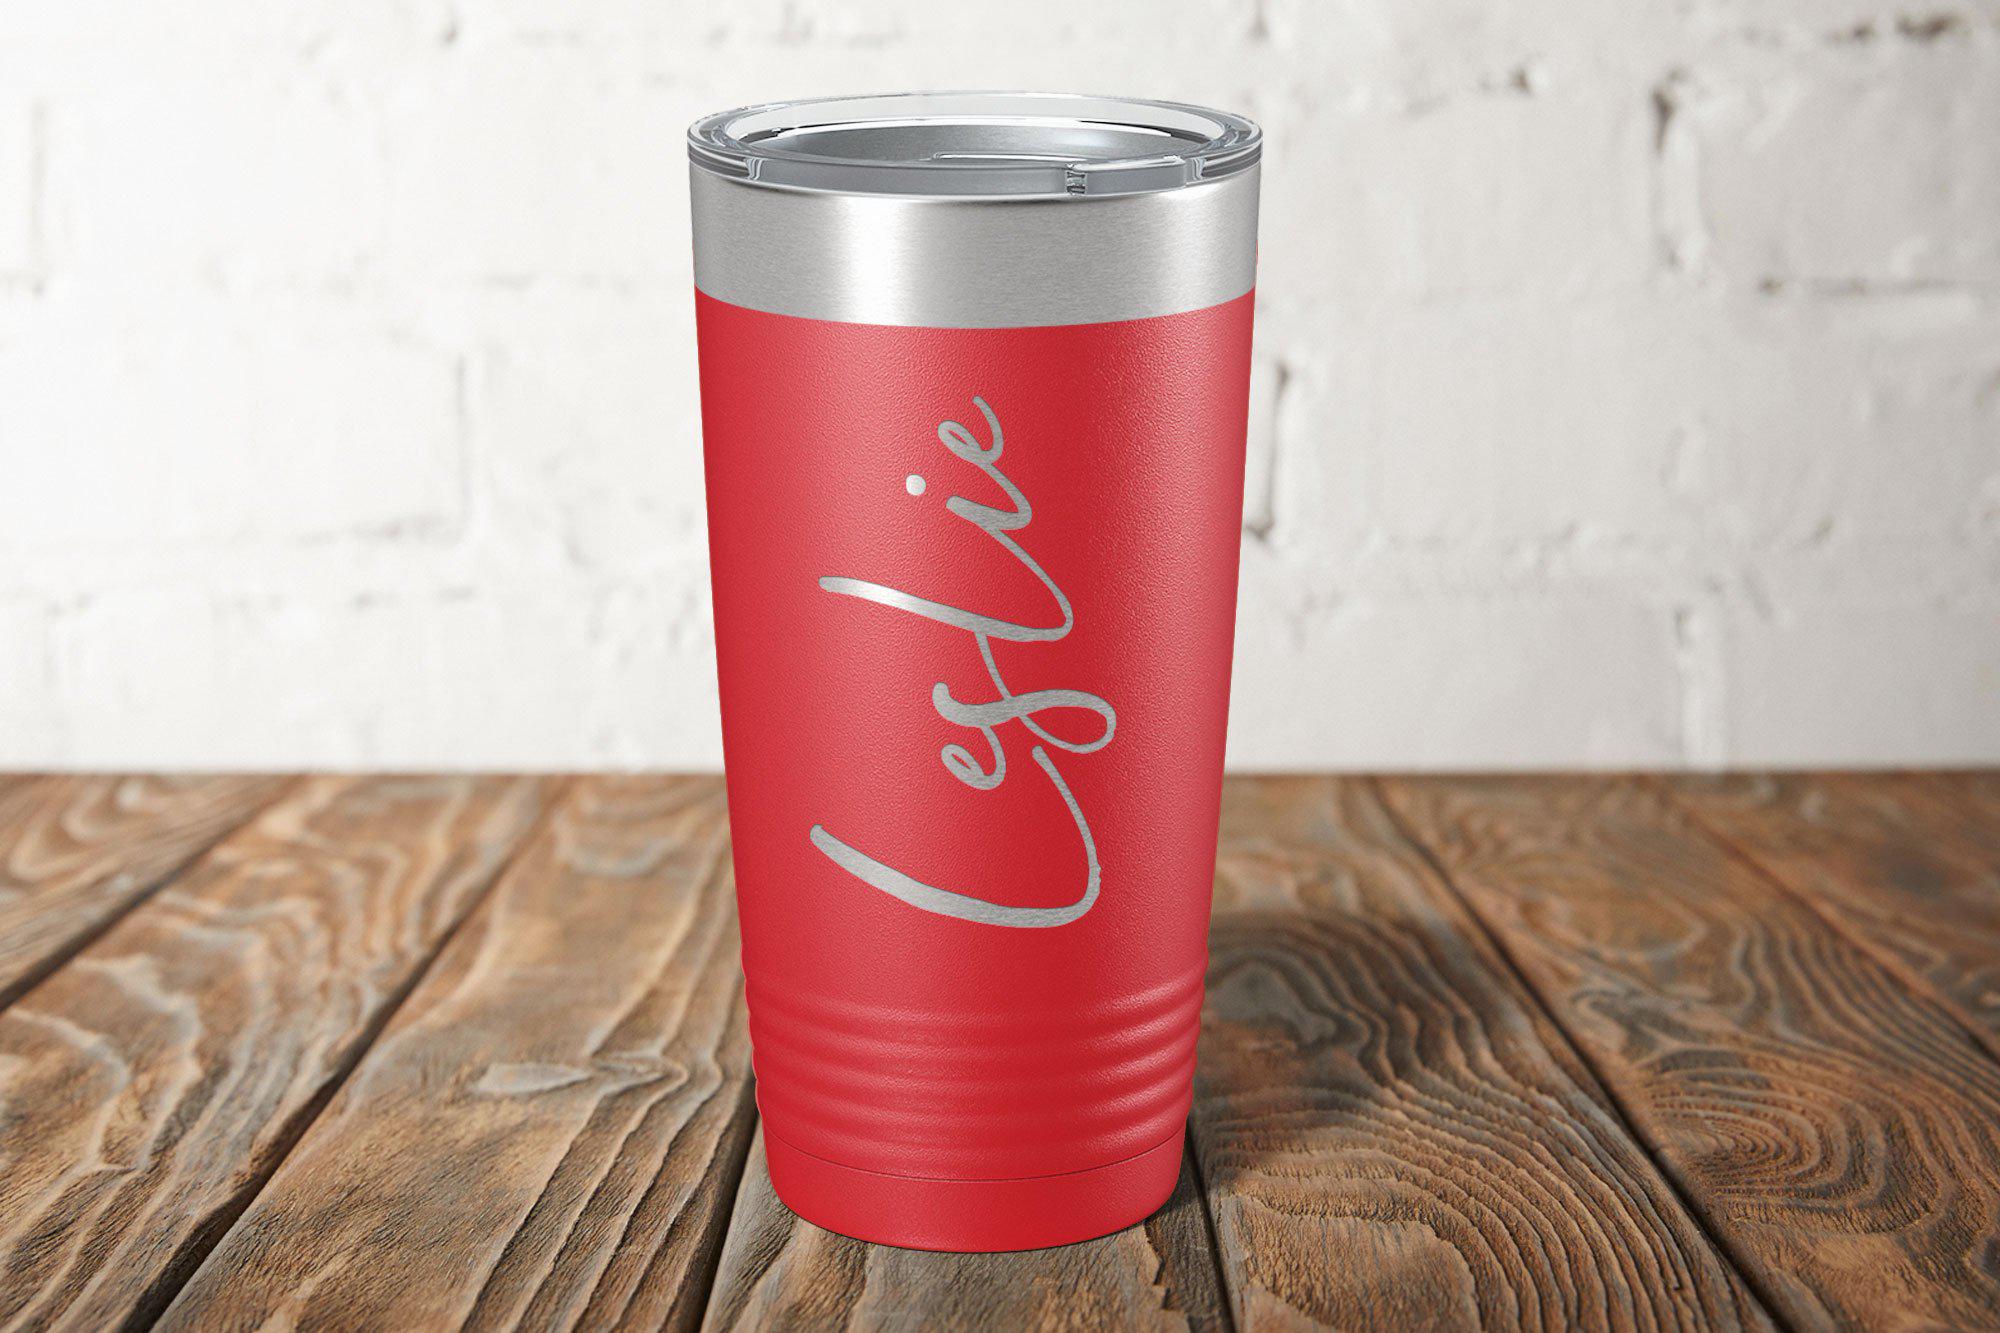 Custom Personalized Dark Hunter Green Glitter Tumbler Cup With Lid